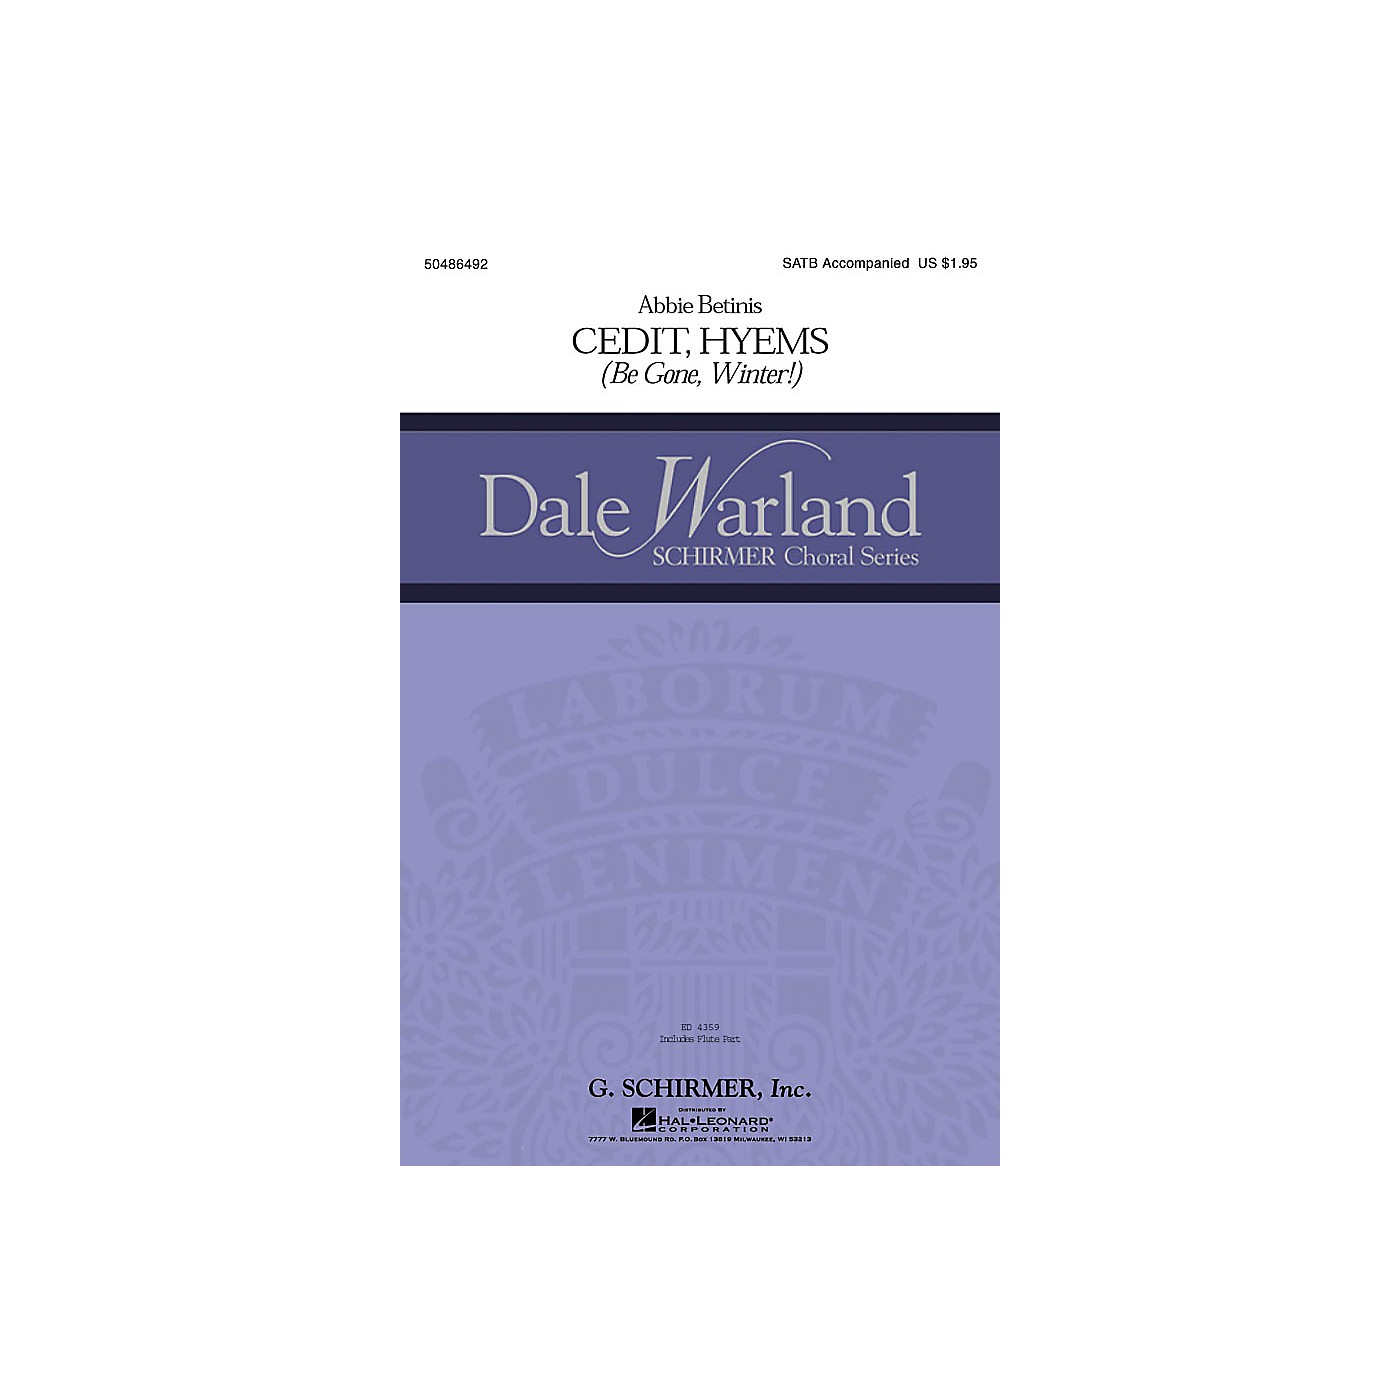 G. Schirmer Cedit Hyems (Be Gone, Winter!) (Dale Warland Choral Series) SSAA Composed by Abbie Betinis thumbnail